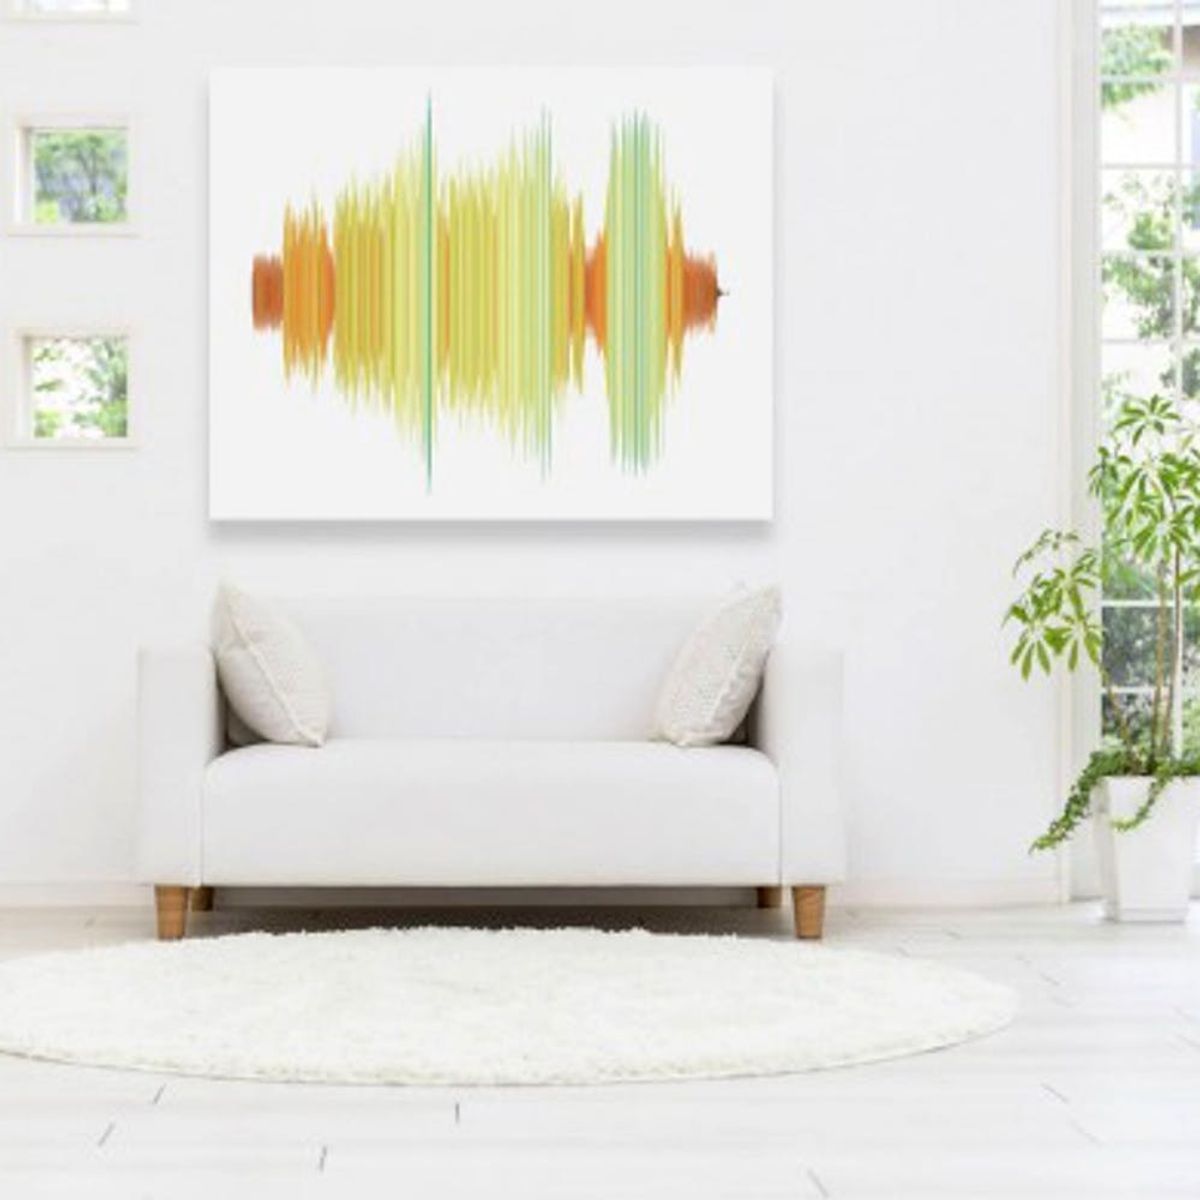 This Company Turns Your Favorite Sound or Song into Colorful Wall Art